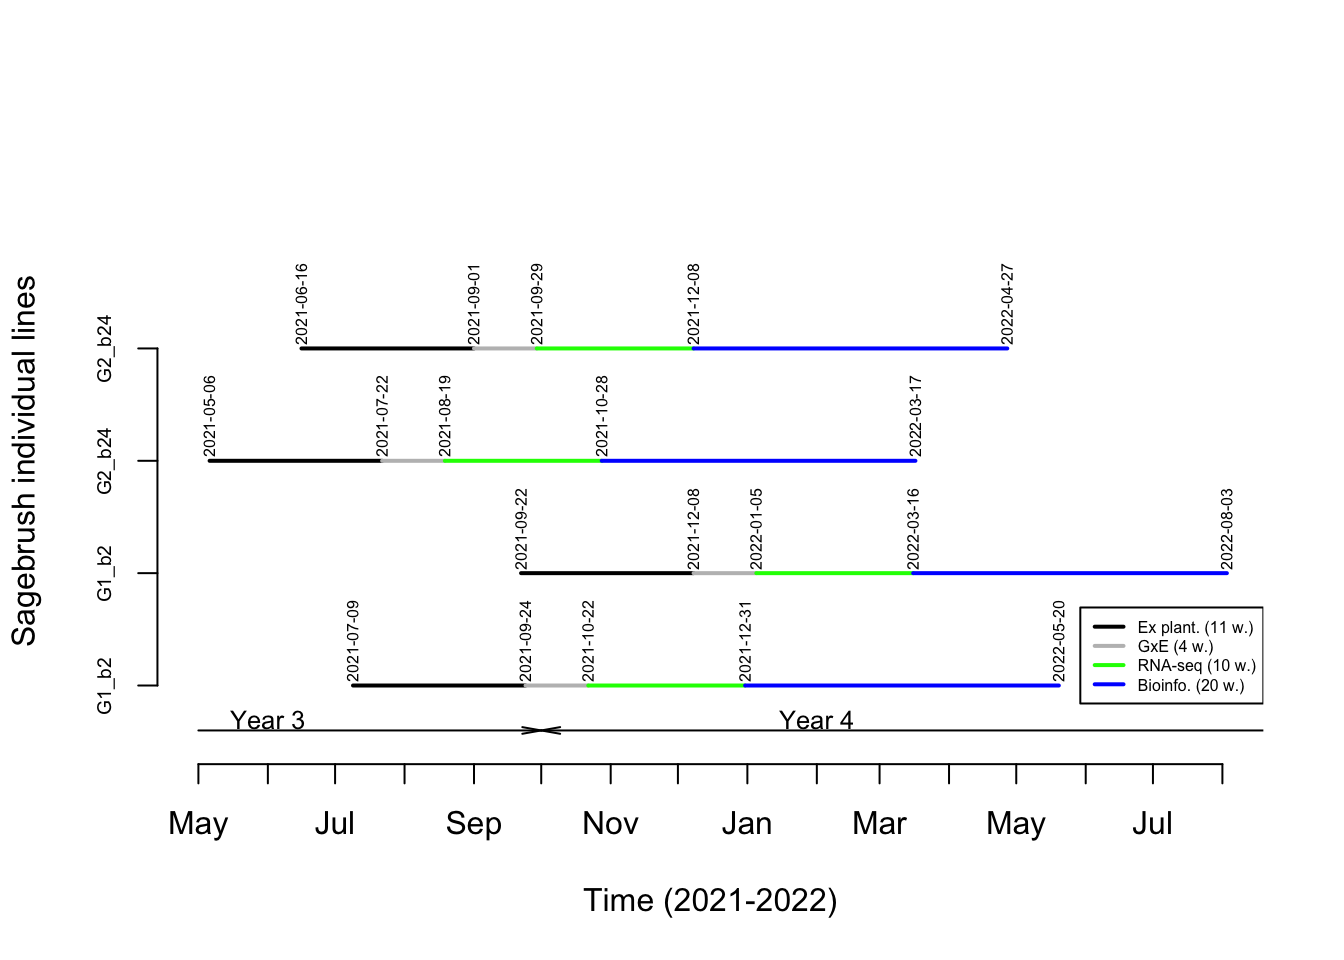 Timetable associated to GxE experiments and subsequent RNA sequencing and bioinformatic analyses used for annotate the sagebrush genome. Please see text for more details on individual lines.